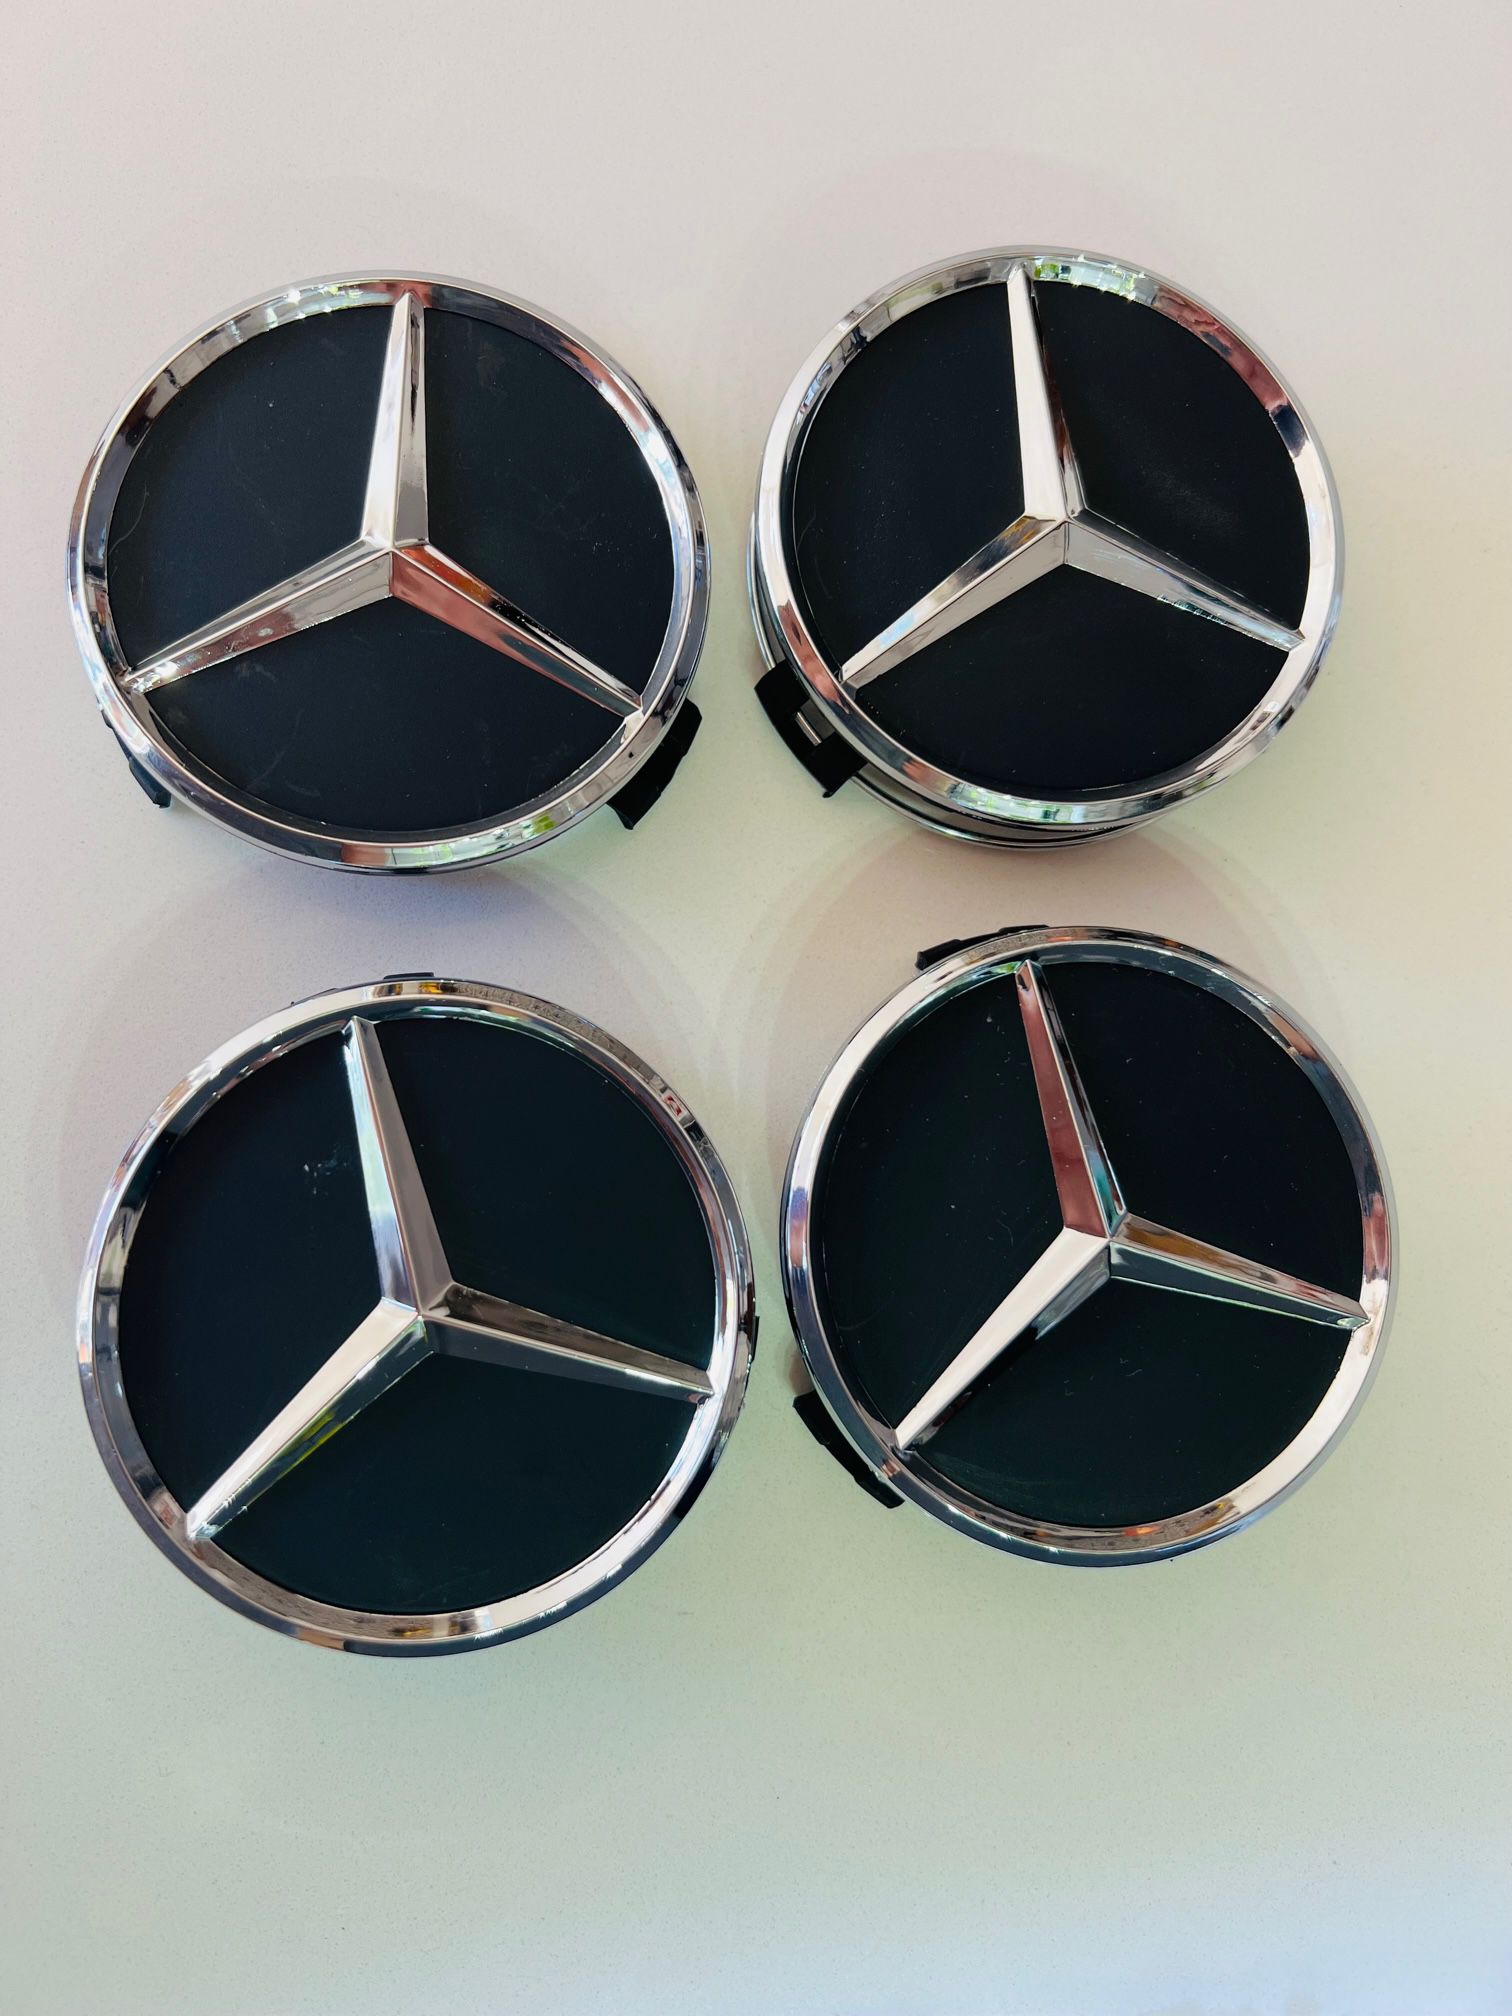 4 Wheel Center Caps 75mm Black Chrome Fits Mercedes Benz MB AMG Fast Shipping!